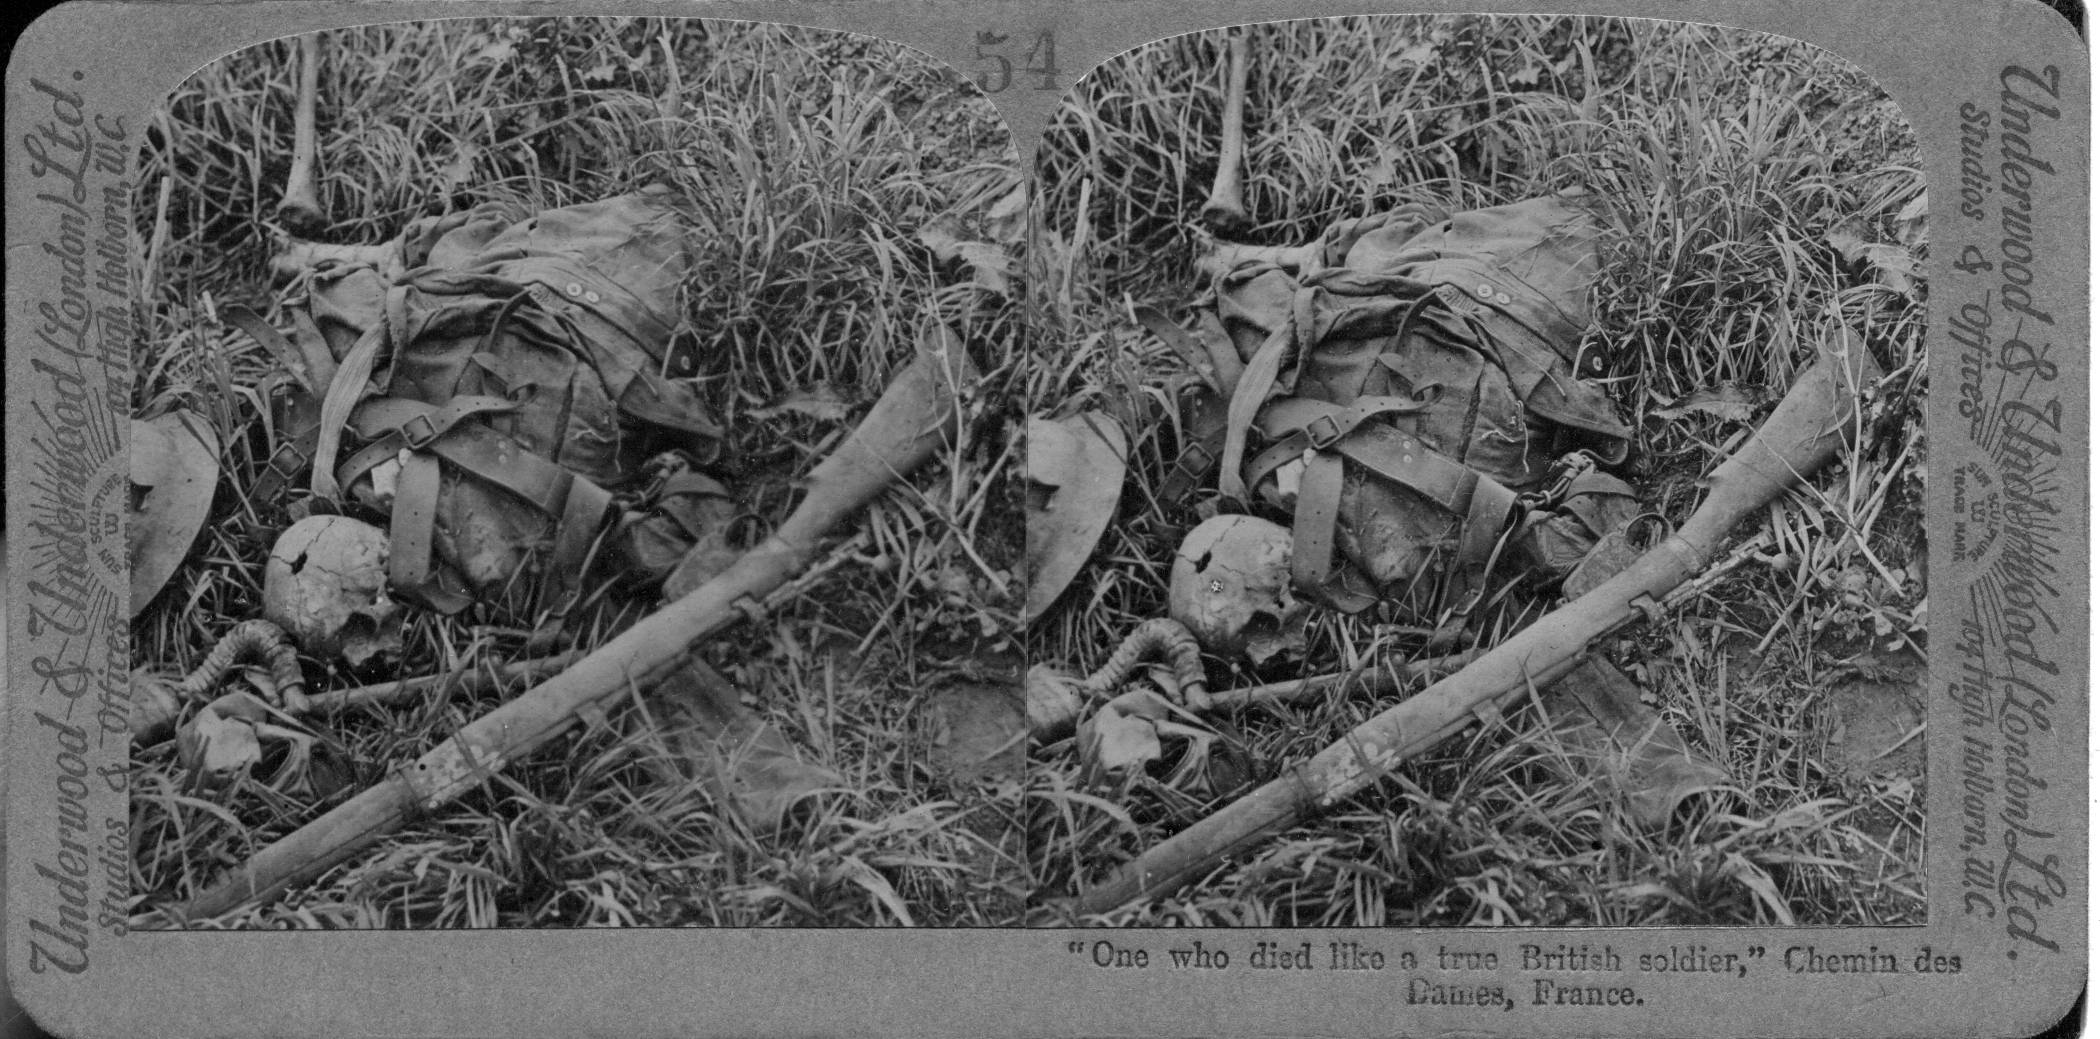 "One who died like a true British soldier," Chemin des Dames, France